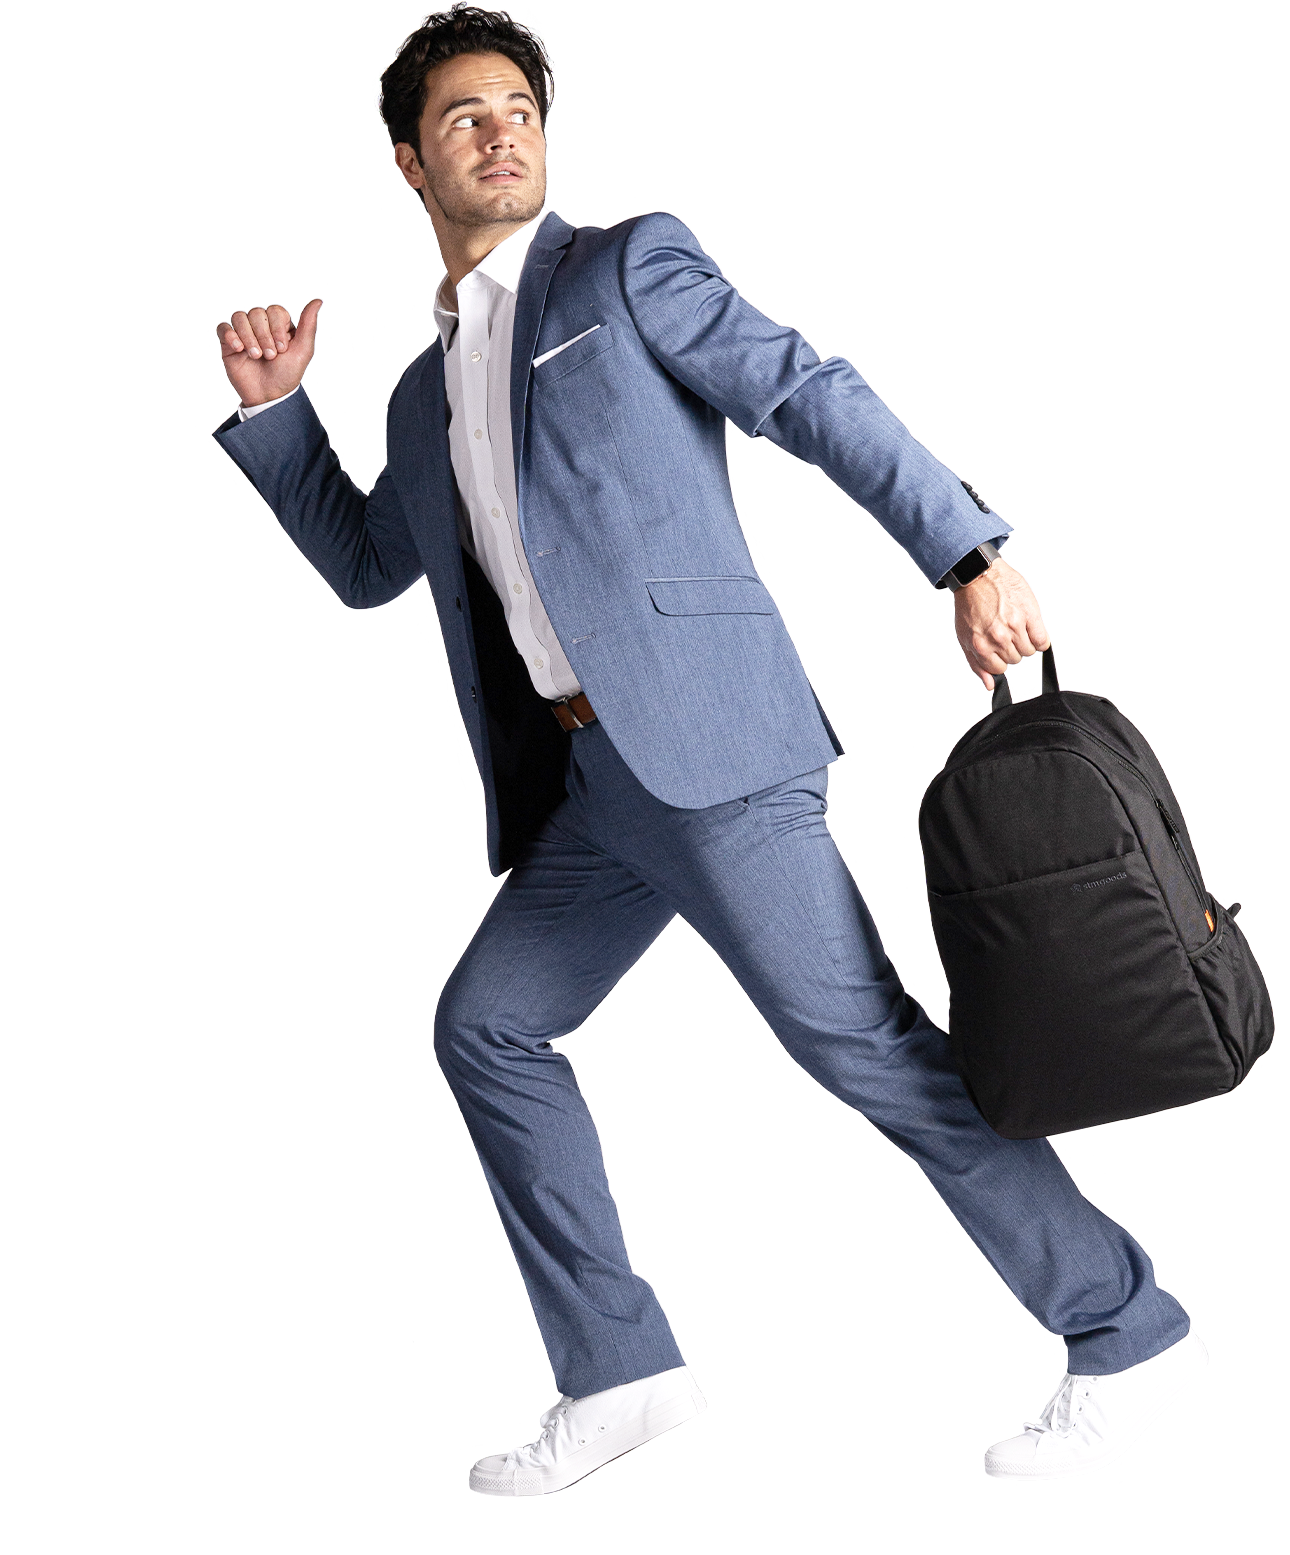 Man in suit, running, with backpack